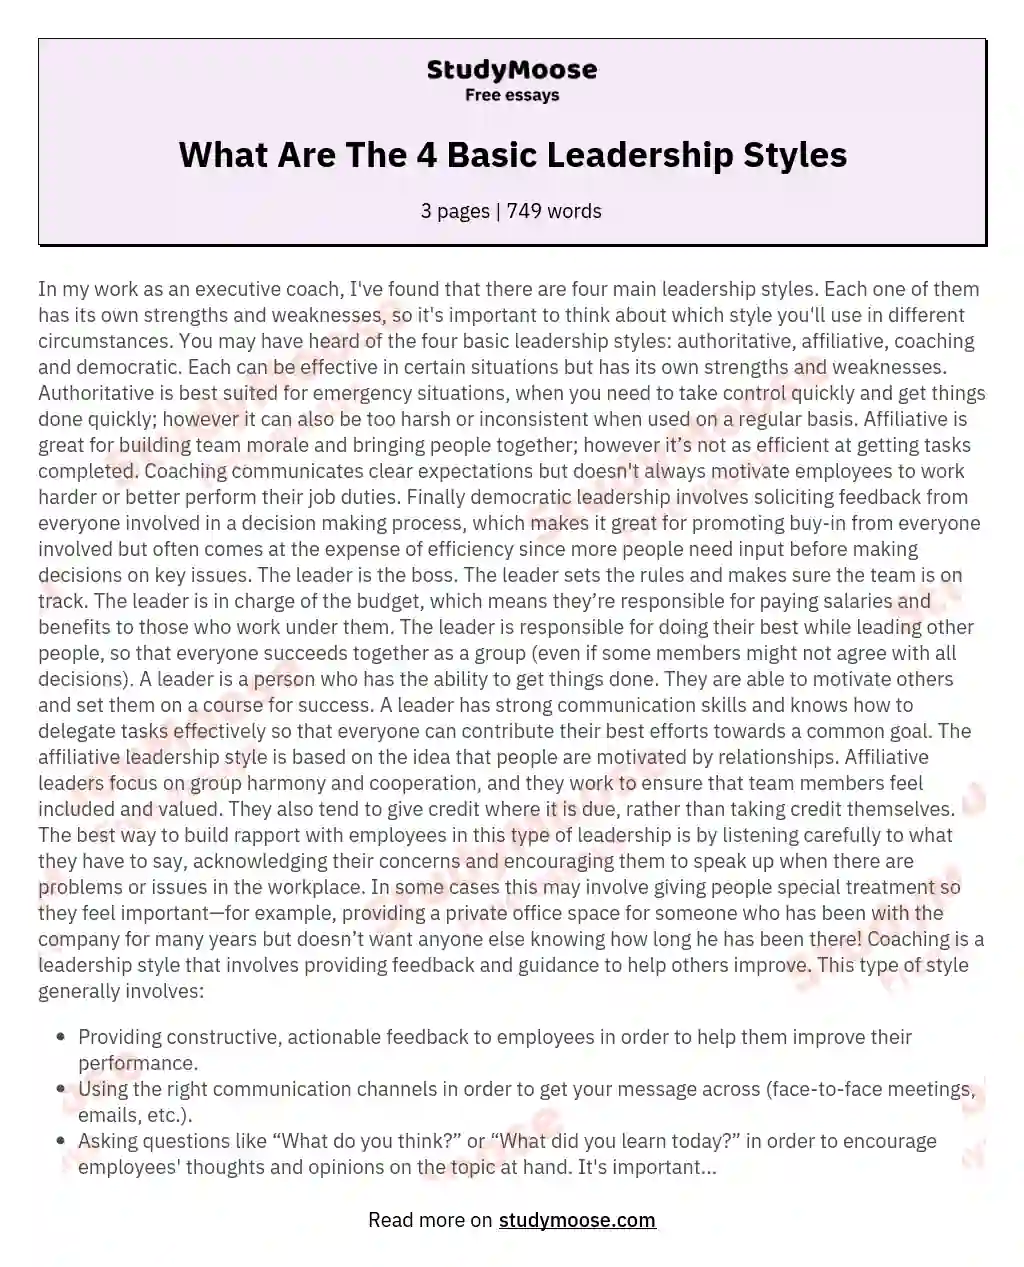 What Are The 4 Basic Leadership Styles essay